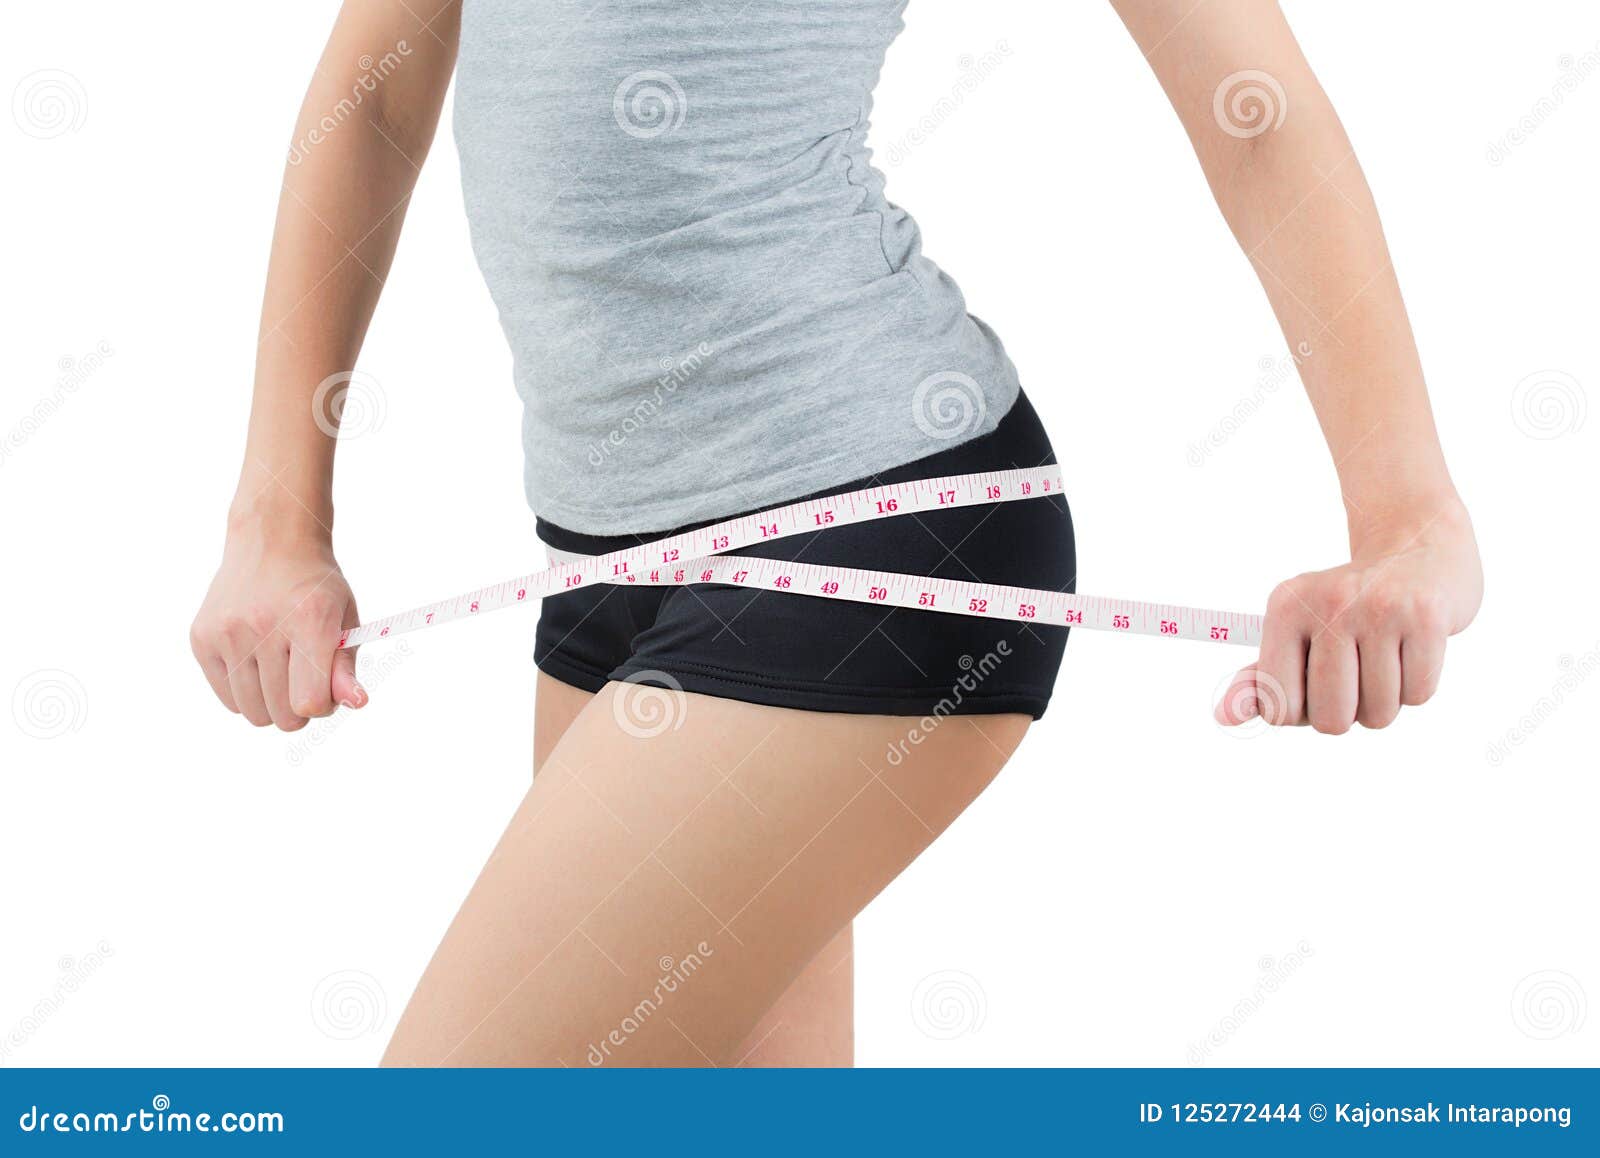 woman measuring her hip- lose weight and healthy body concept- o